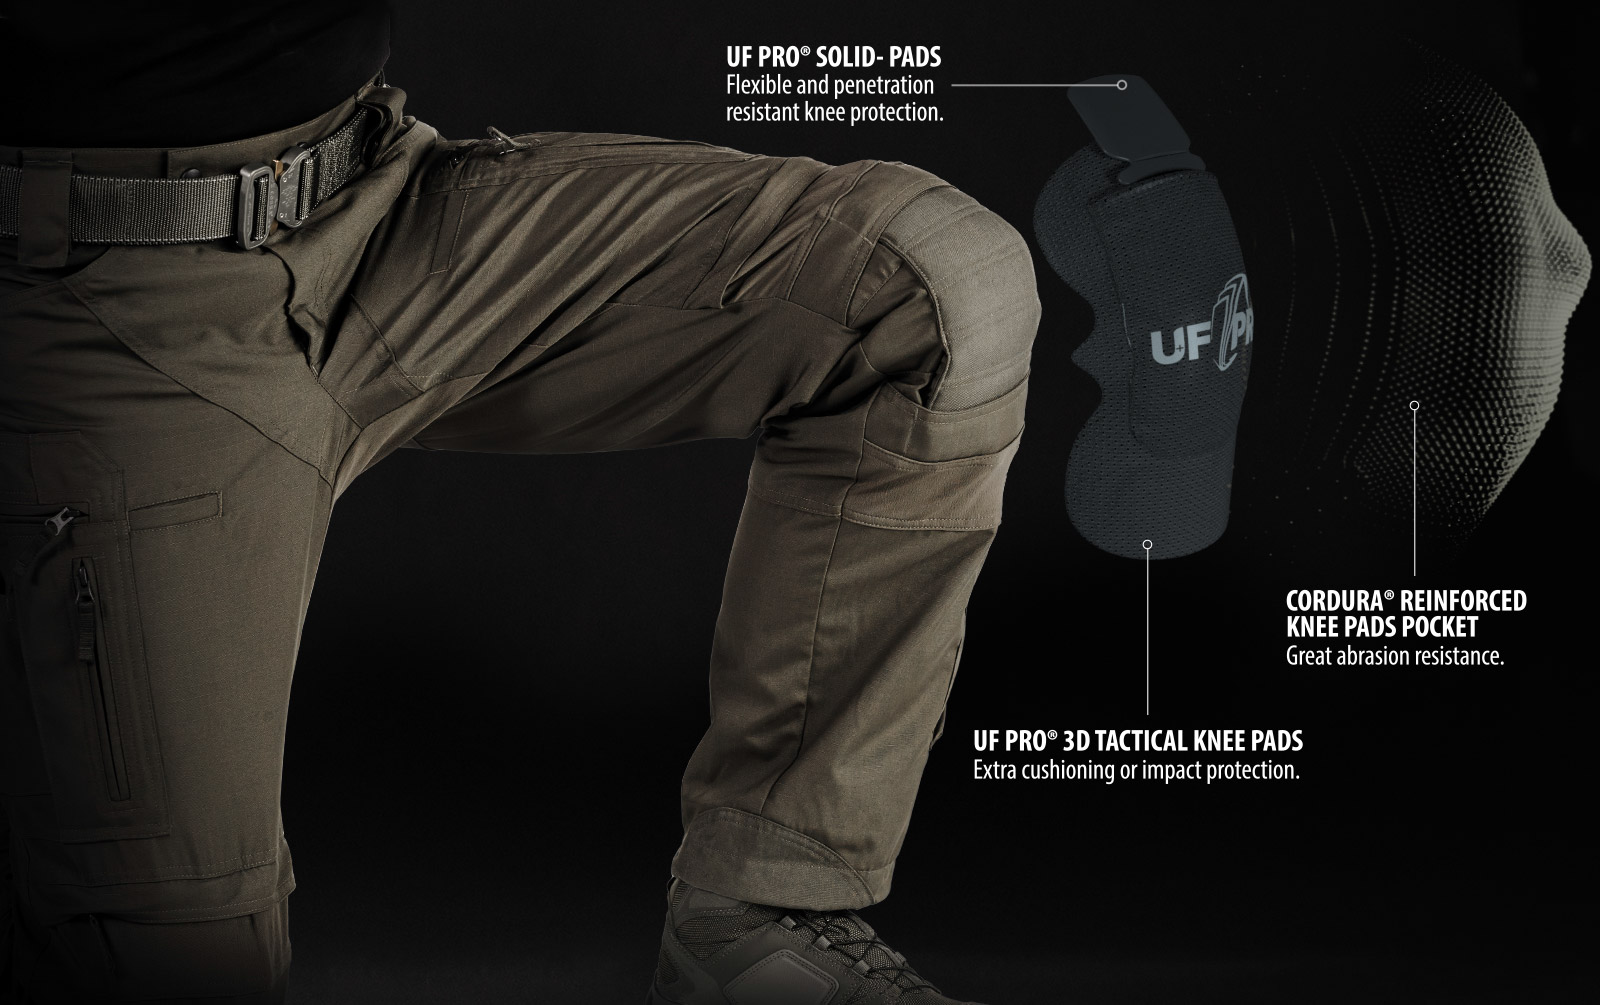 Tactical pants with knee protection | The story behind the design